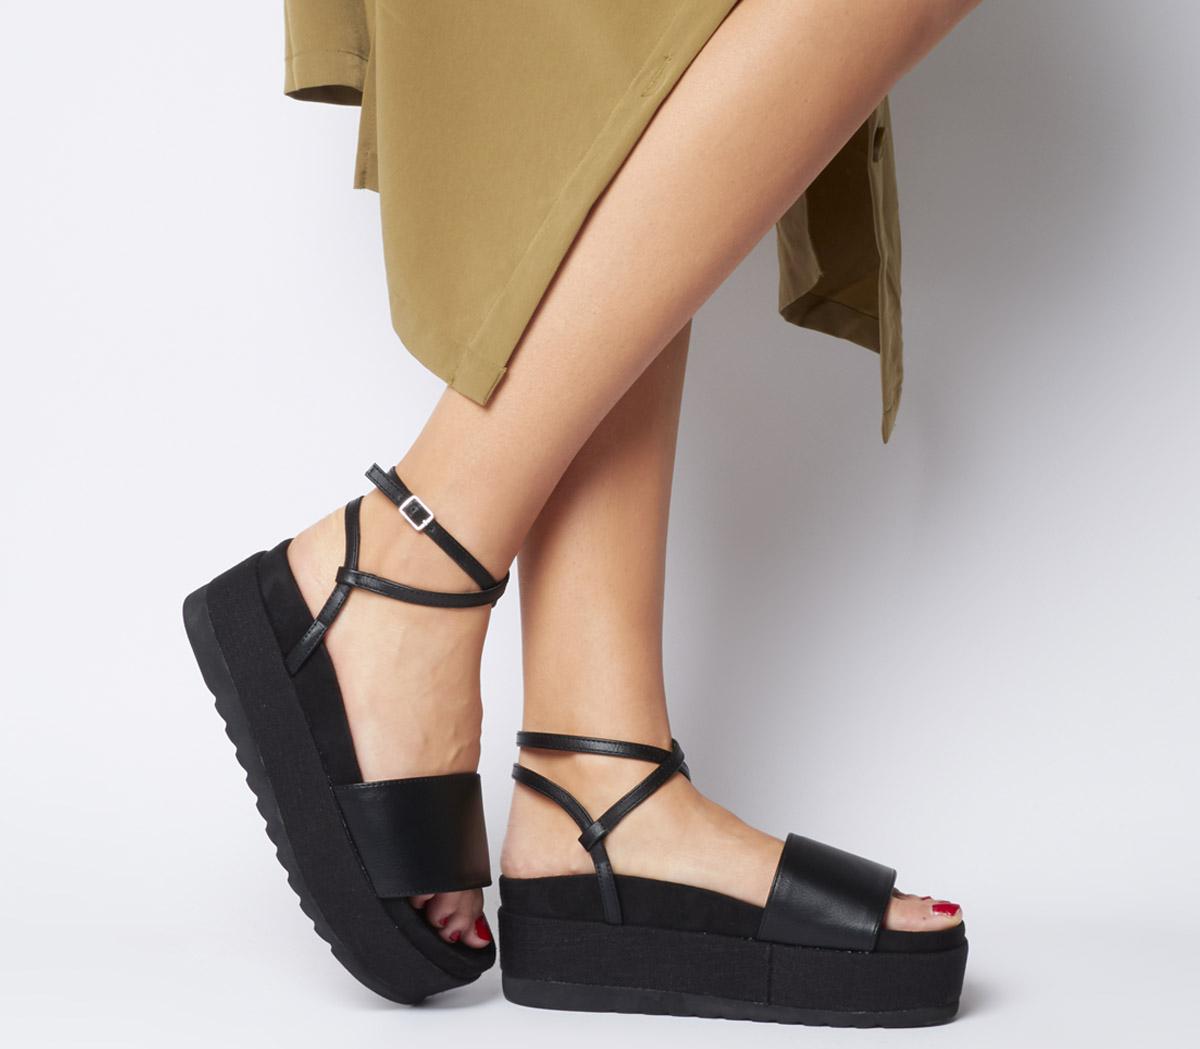 black flats with strap around ankle